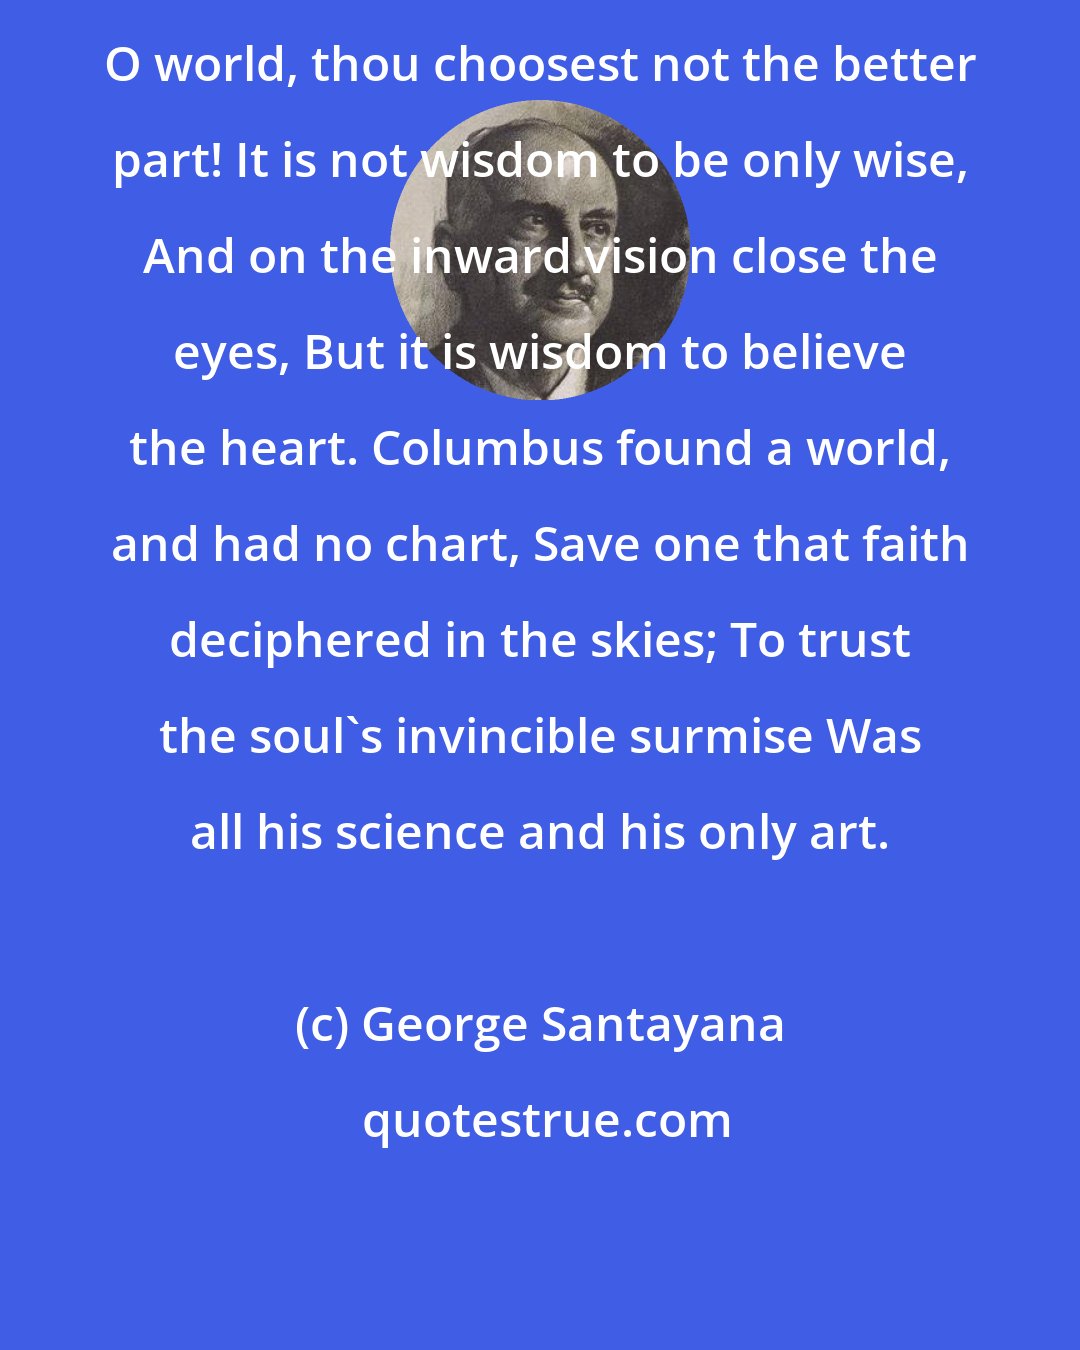 George Santayana: O world, thou choosest not the better part! It is not wisdom to be only wise, And on the inward vision close the eyes, But it is wisdom to believe the heart. Columbus found a world, and had no chart, Save one that faith deciphered in the skies; To trust the soul's invincible surmise Was all his science and his only art.